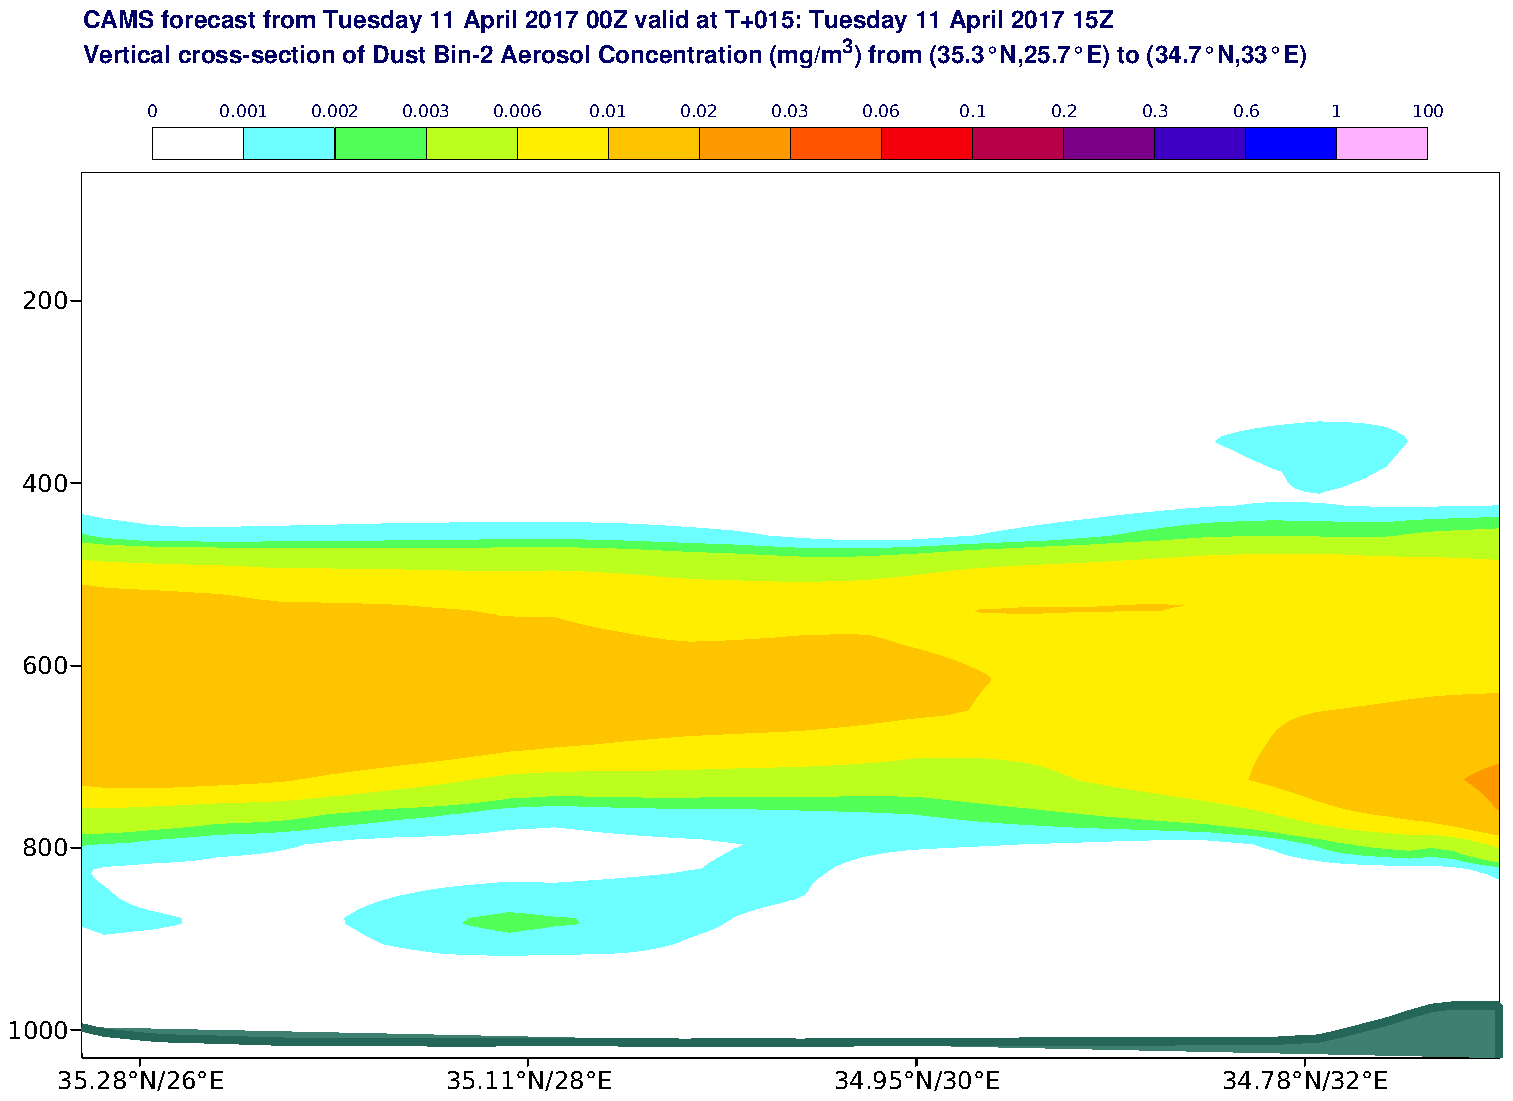 Vertical cross-section of Dust Bin-2 Aerosol Concentration (mg/m3) valid at T15 - 2017-04-11 15:00